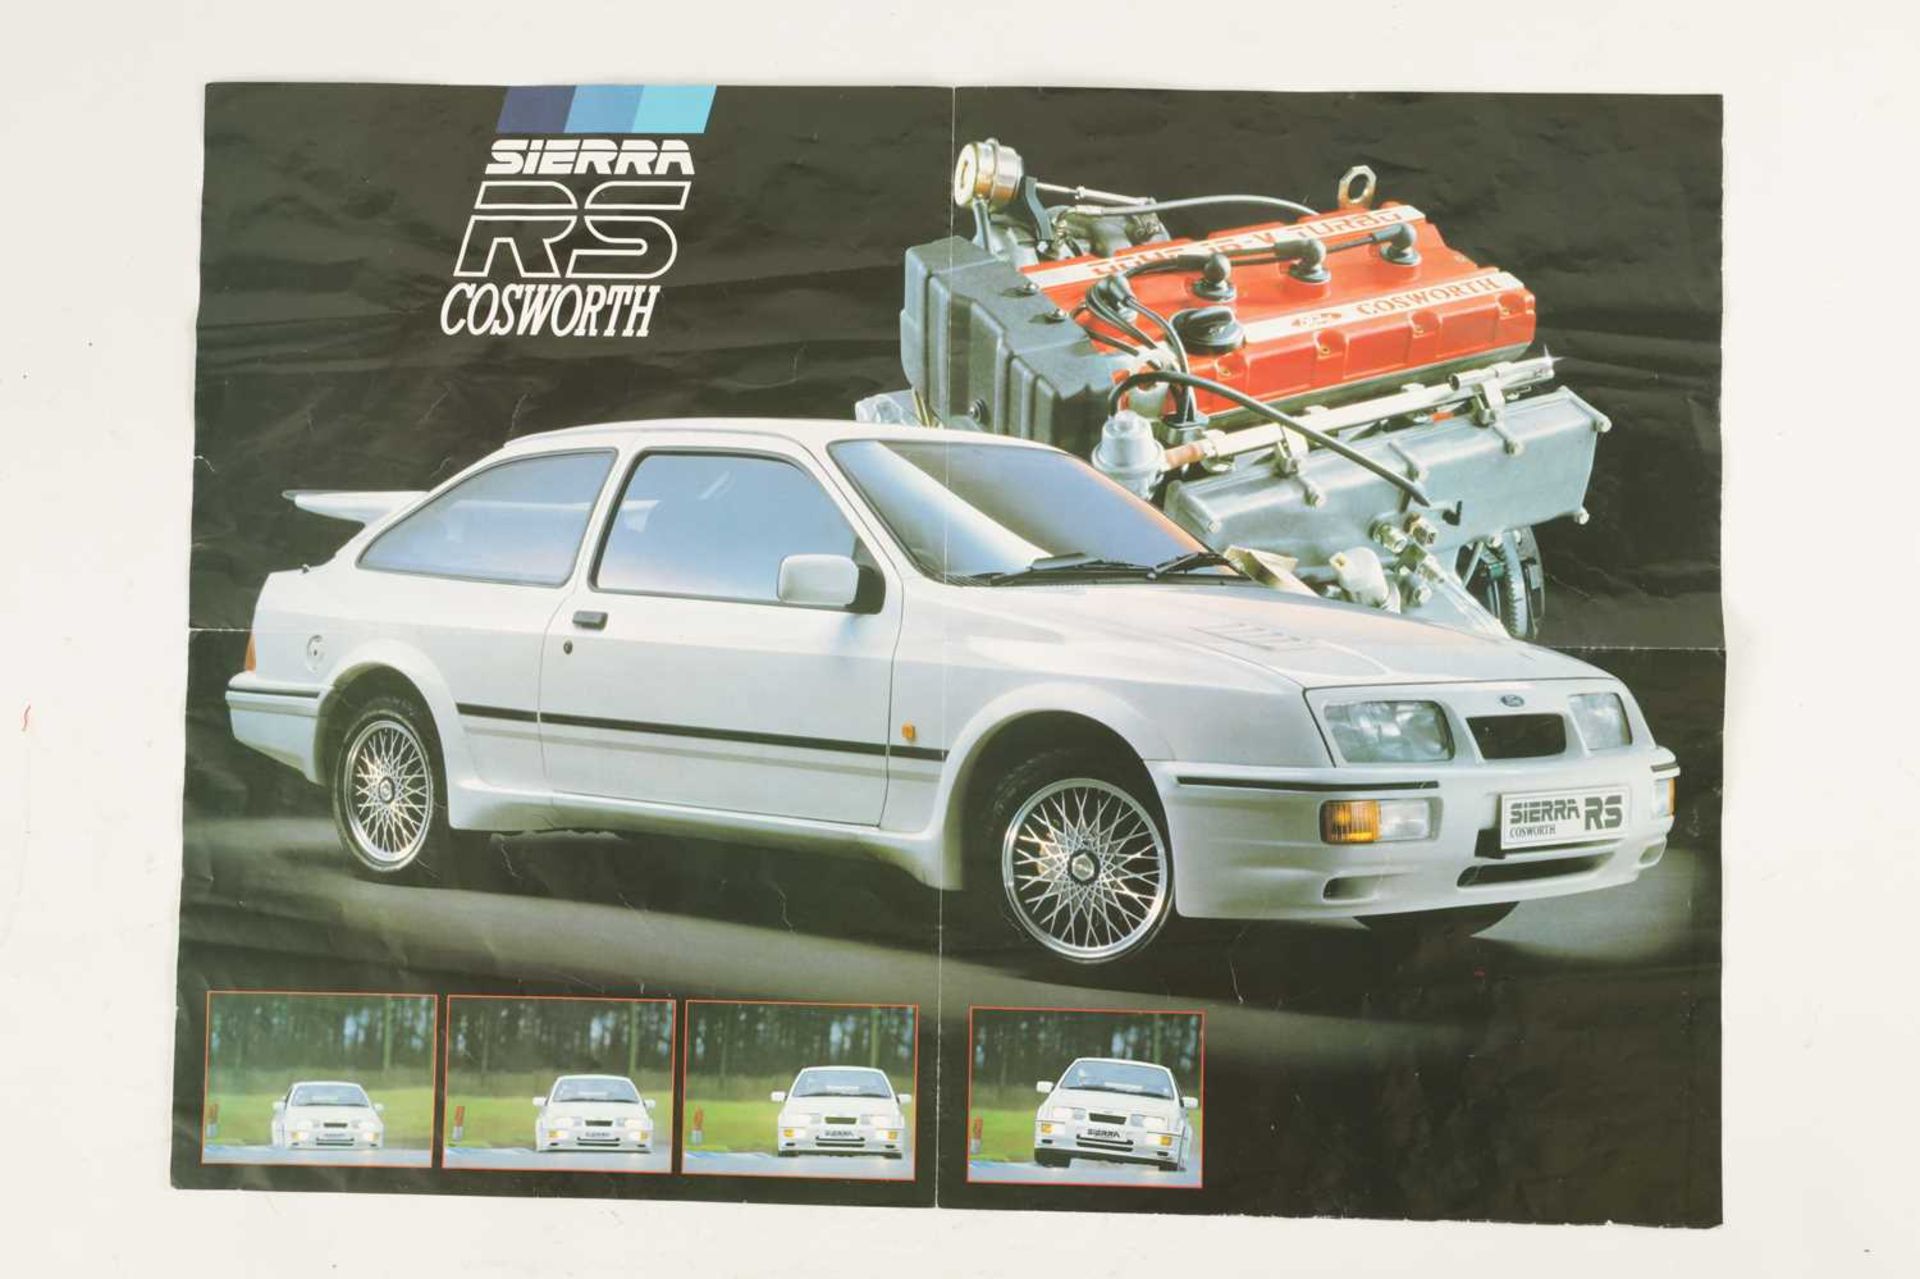 AN ORIGINAL FORD SIERRA RS COSWORTH VEHICLE SALES BROCHURE - Image 5 of 5